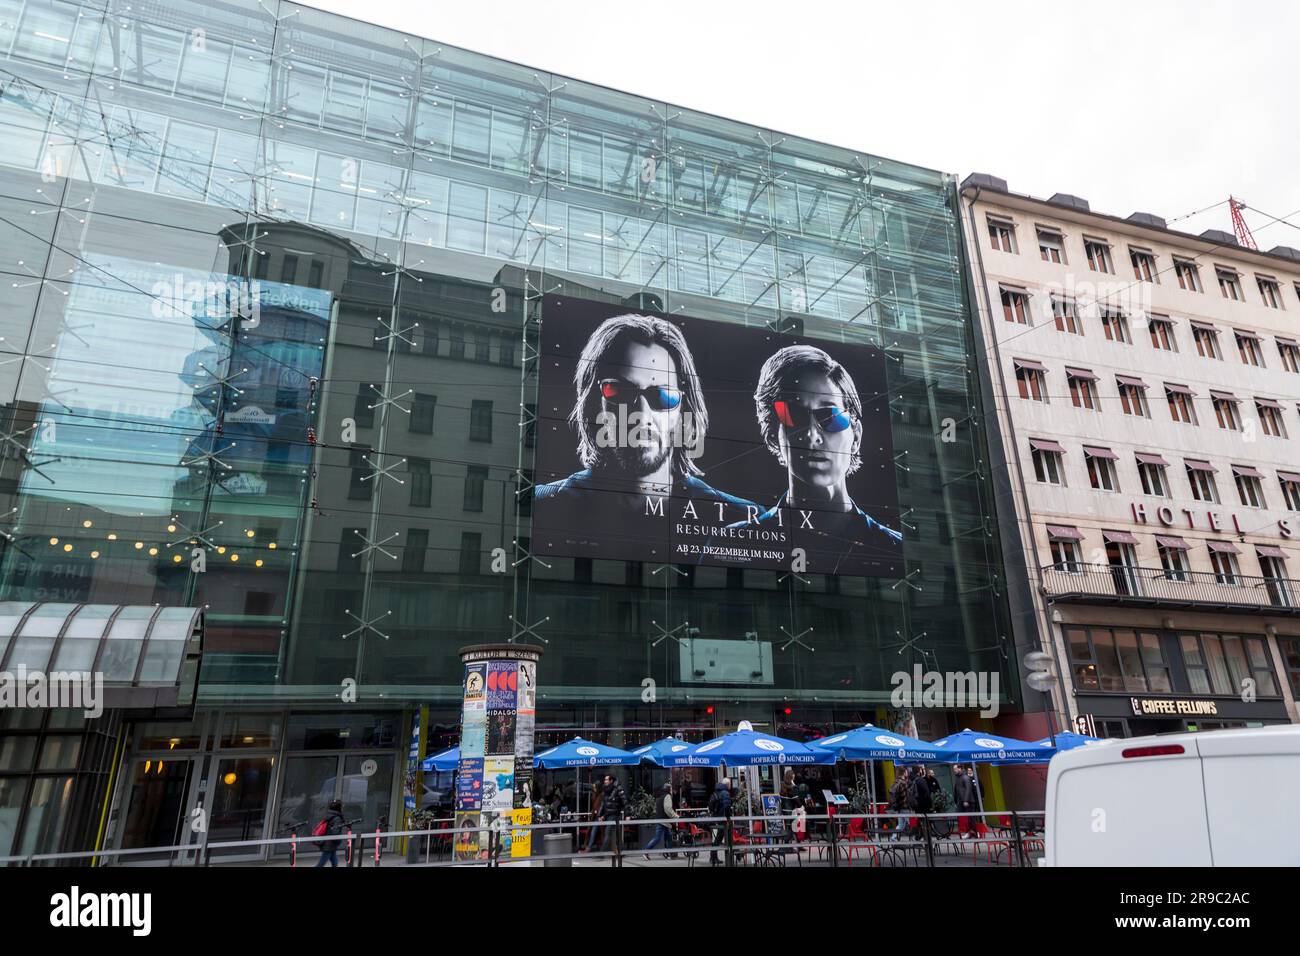 Munich, Germany - DEC 23, 2021: Large advertisement of the movie Matrix, Resurrections on the wall of a building on Bayerstrasse, Munich, Germany. Stock Photo